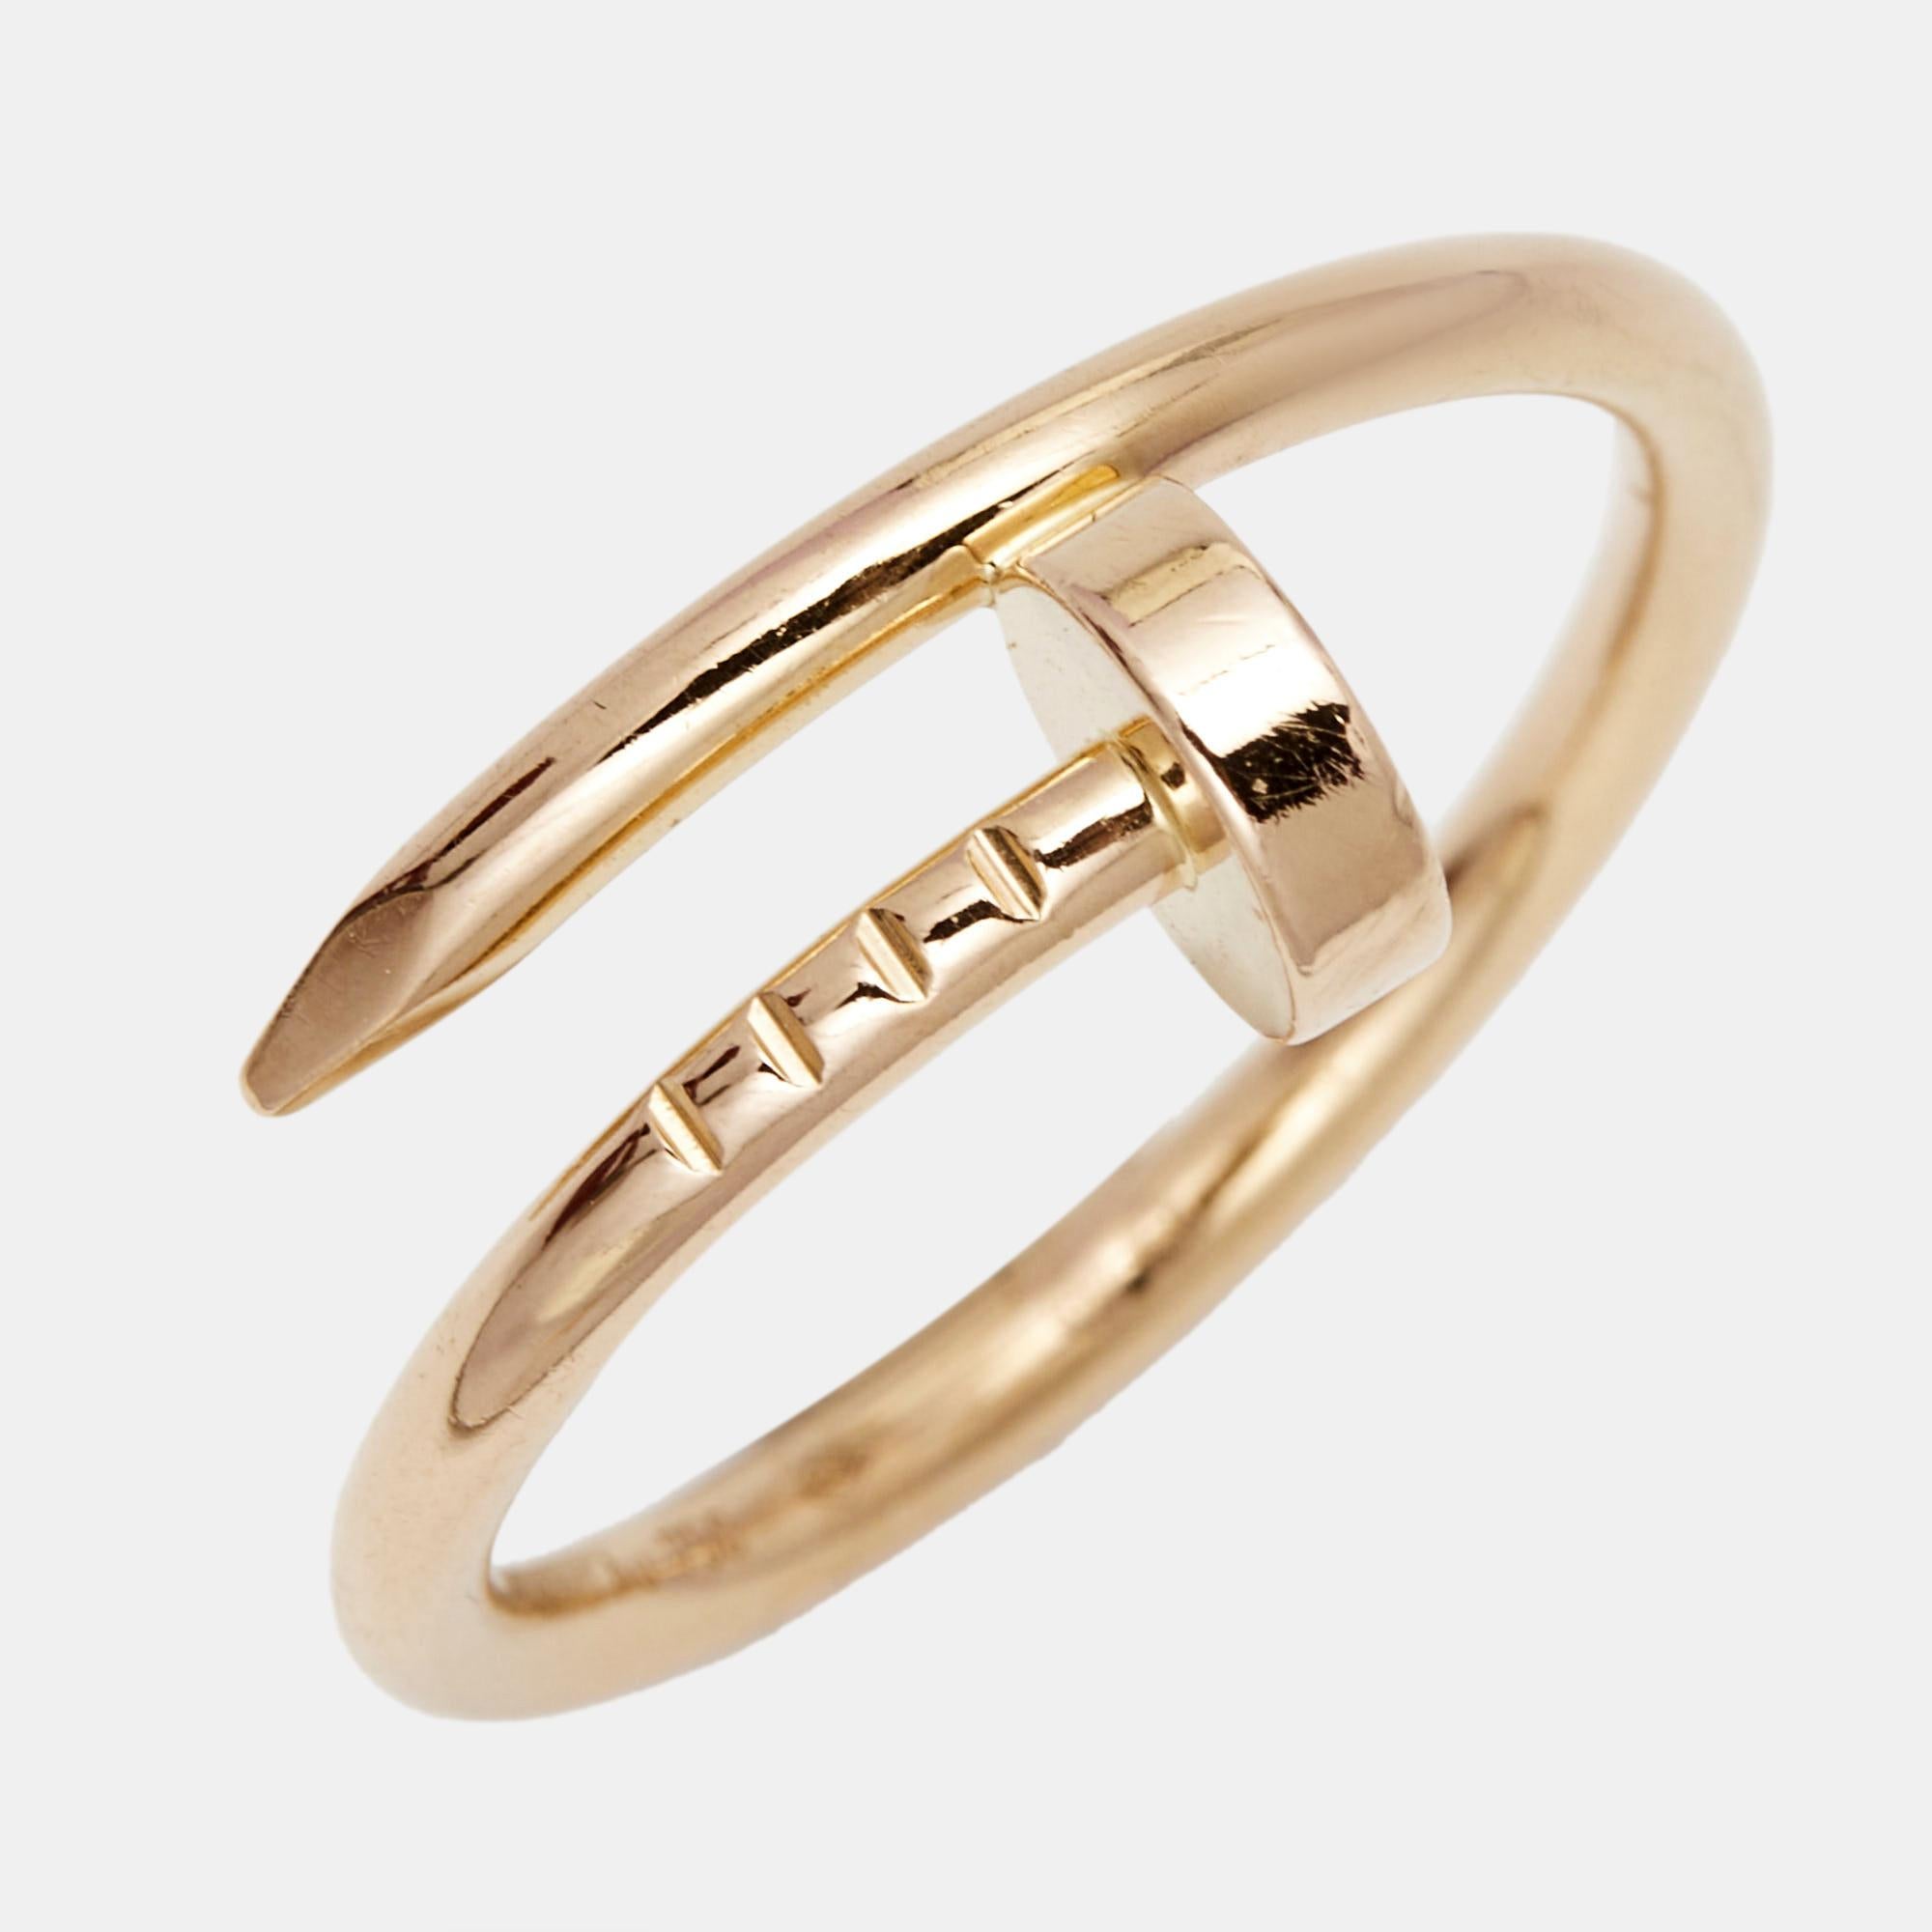 Cartier Juste Un Clou 18k Rose Gold Small Model Ring Size 52 1